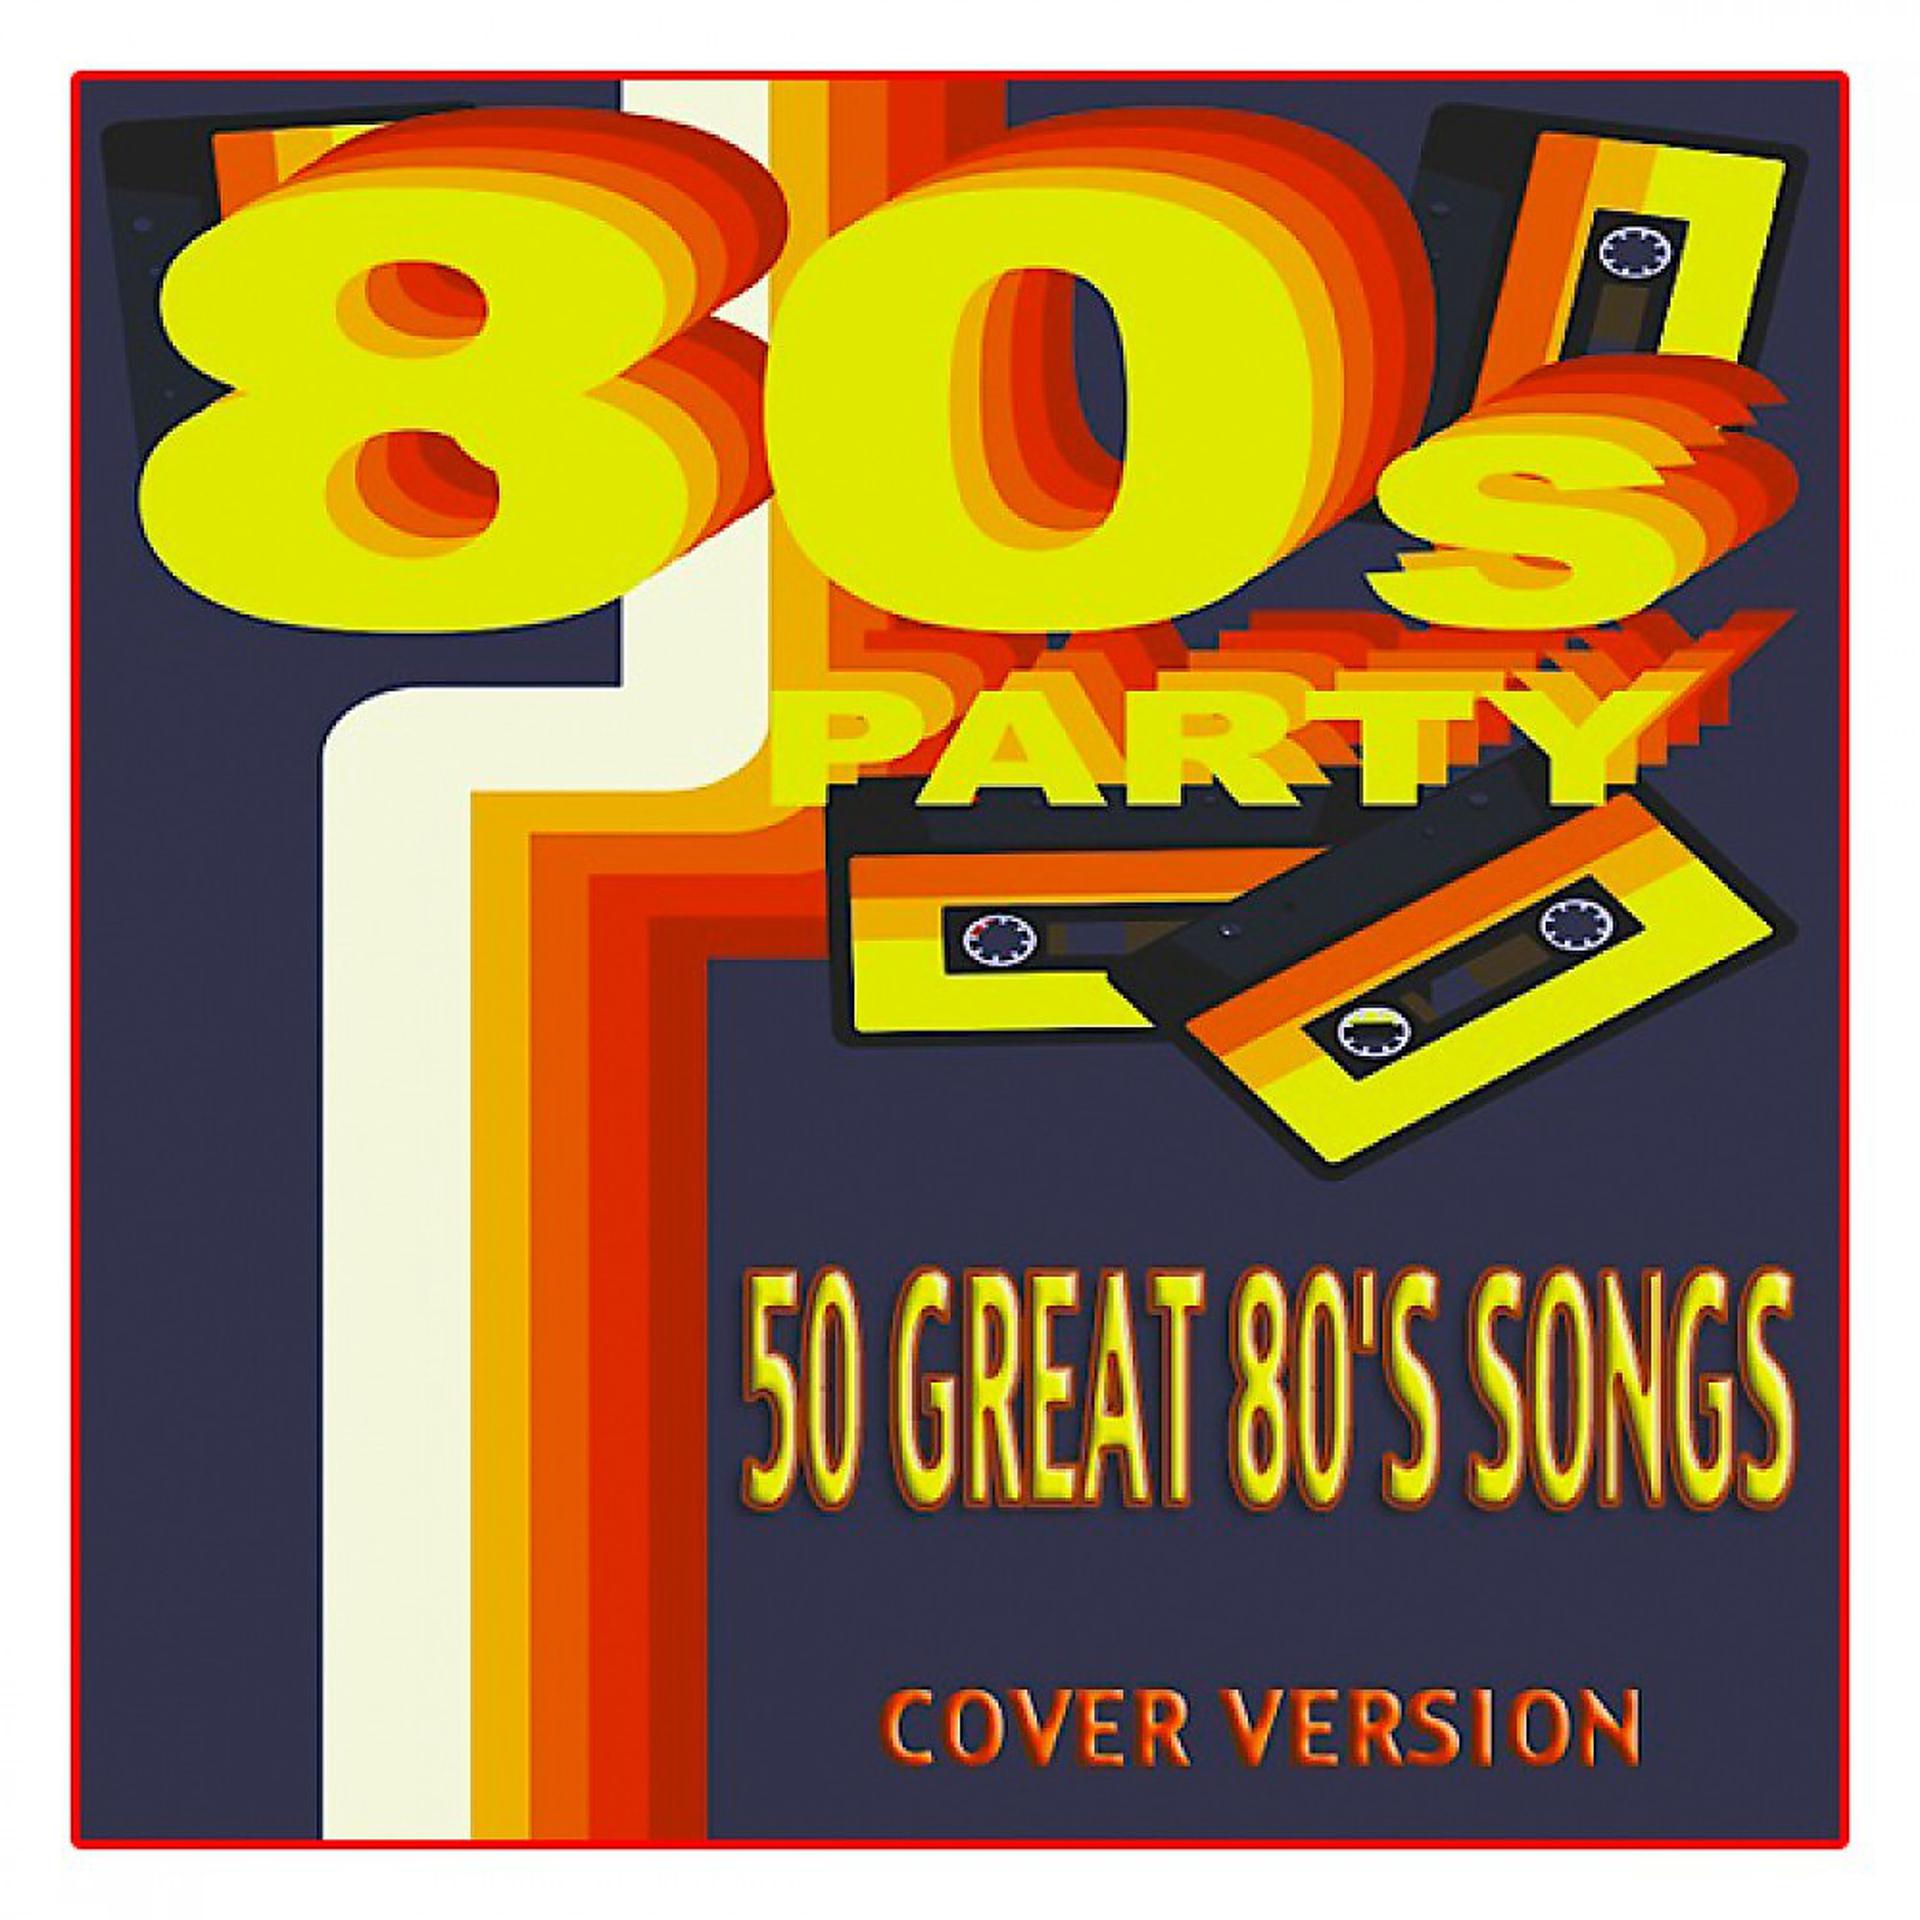 Постер альбома 80's Party (50 Great 80's Songs - Cover Version)